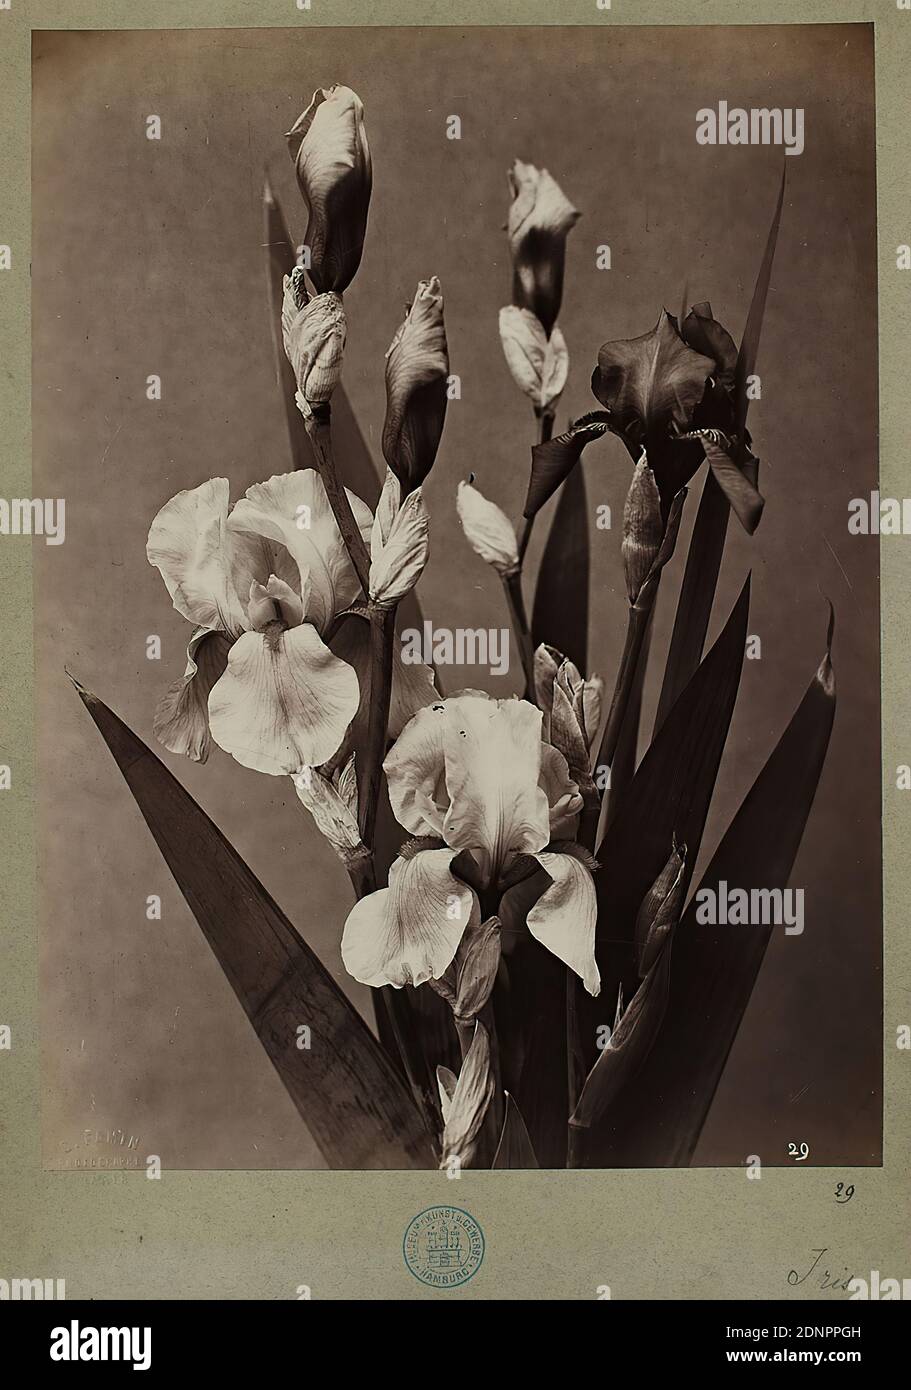 Constant Alexandre Famin, iris, albumin paper, black and white positive process, image size: height: 28,60 cm; width: 21,10 cm, dry stamp: recto u. li.: C. Famin, Photographe, Paris, inscribed, in lead: 29, iris, nature photography, lily Stock Photo